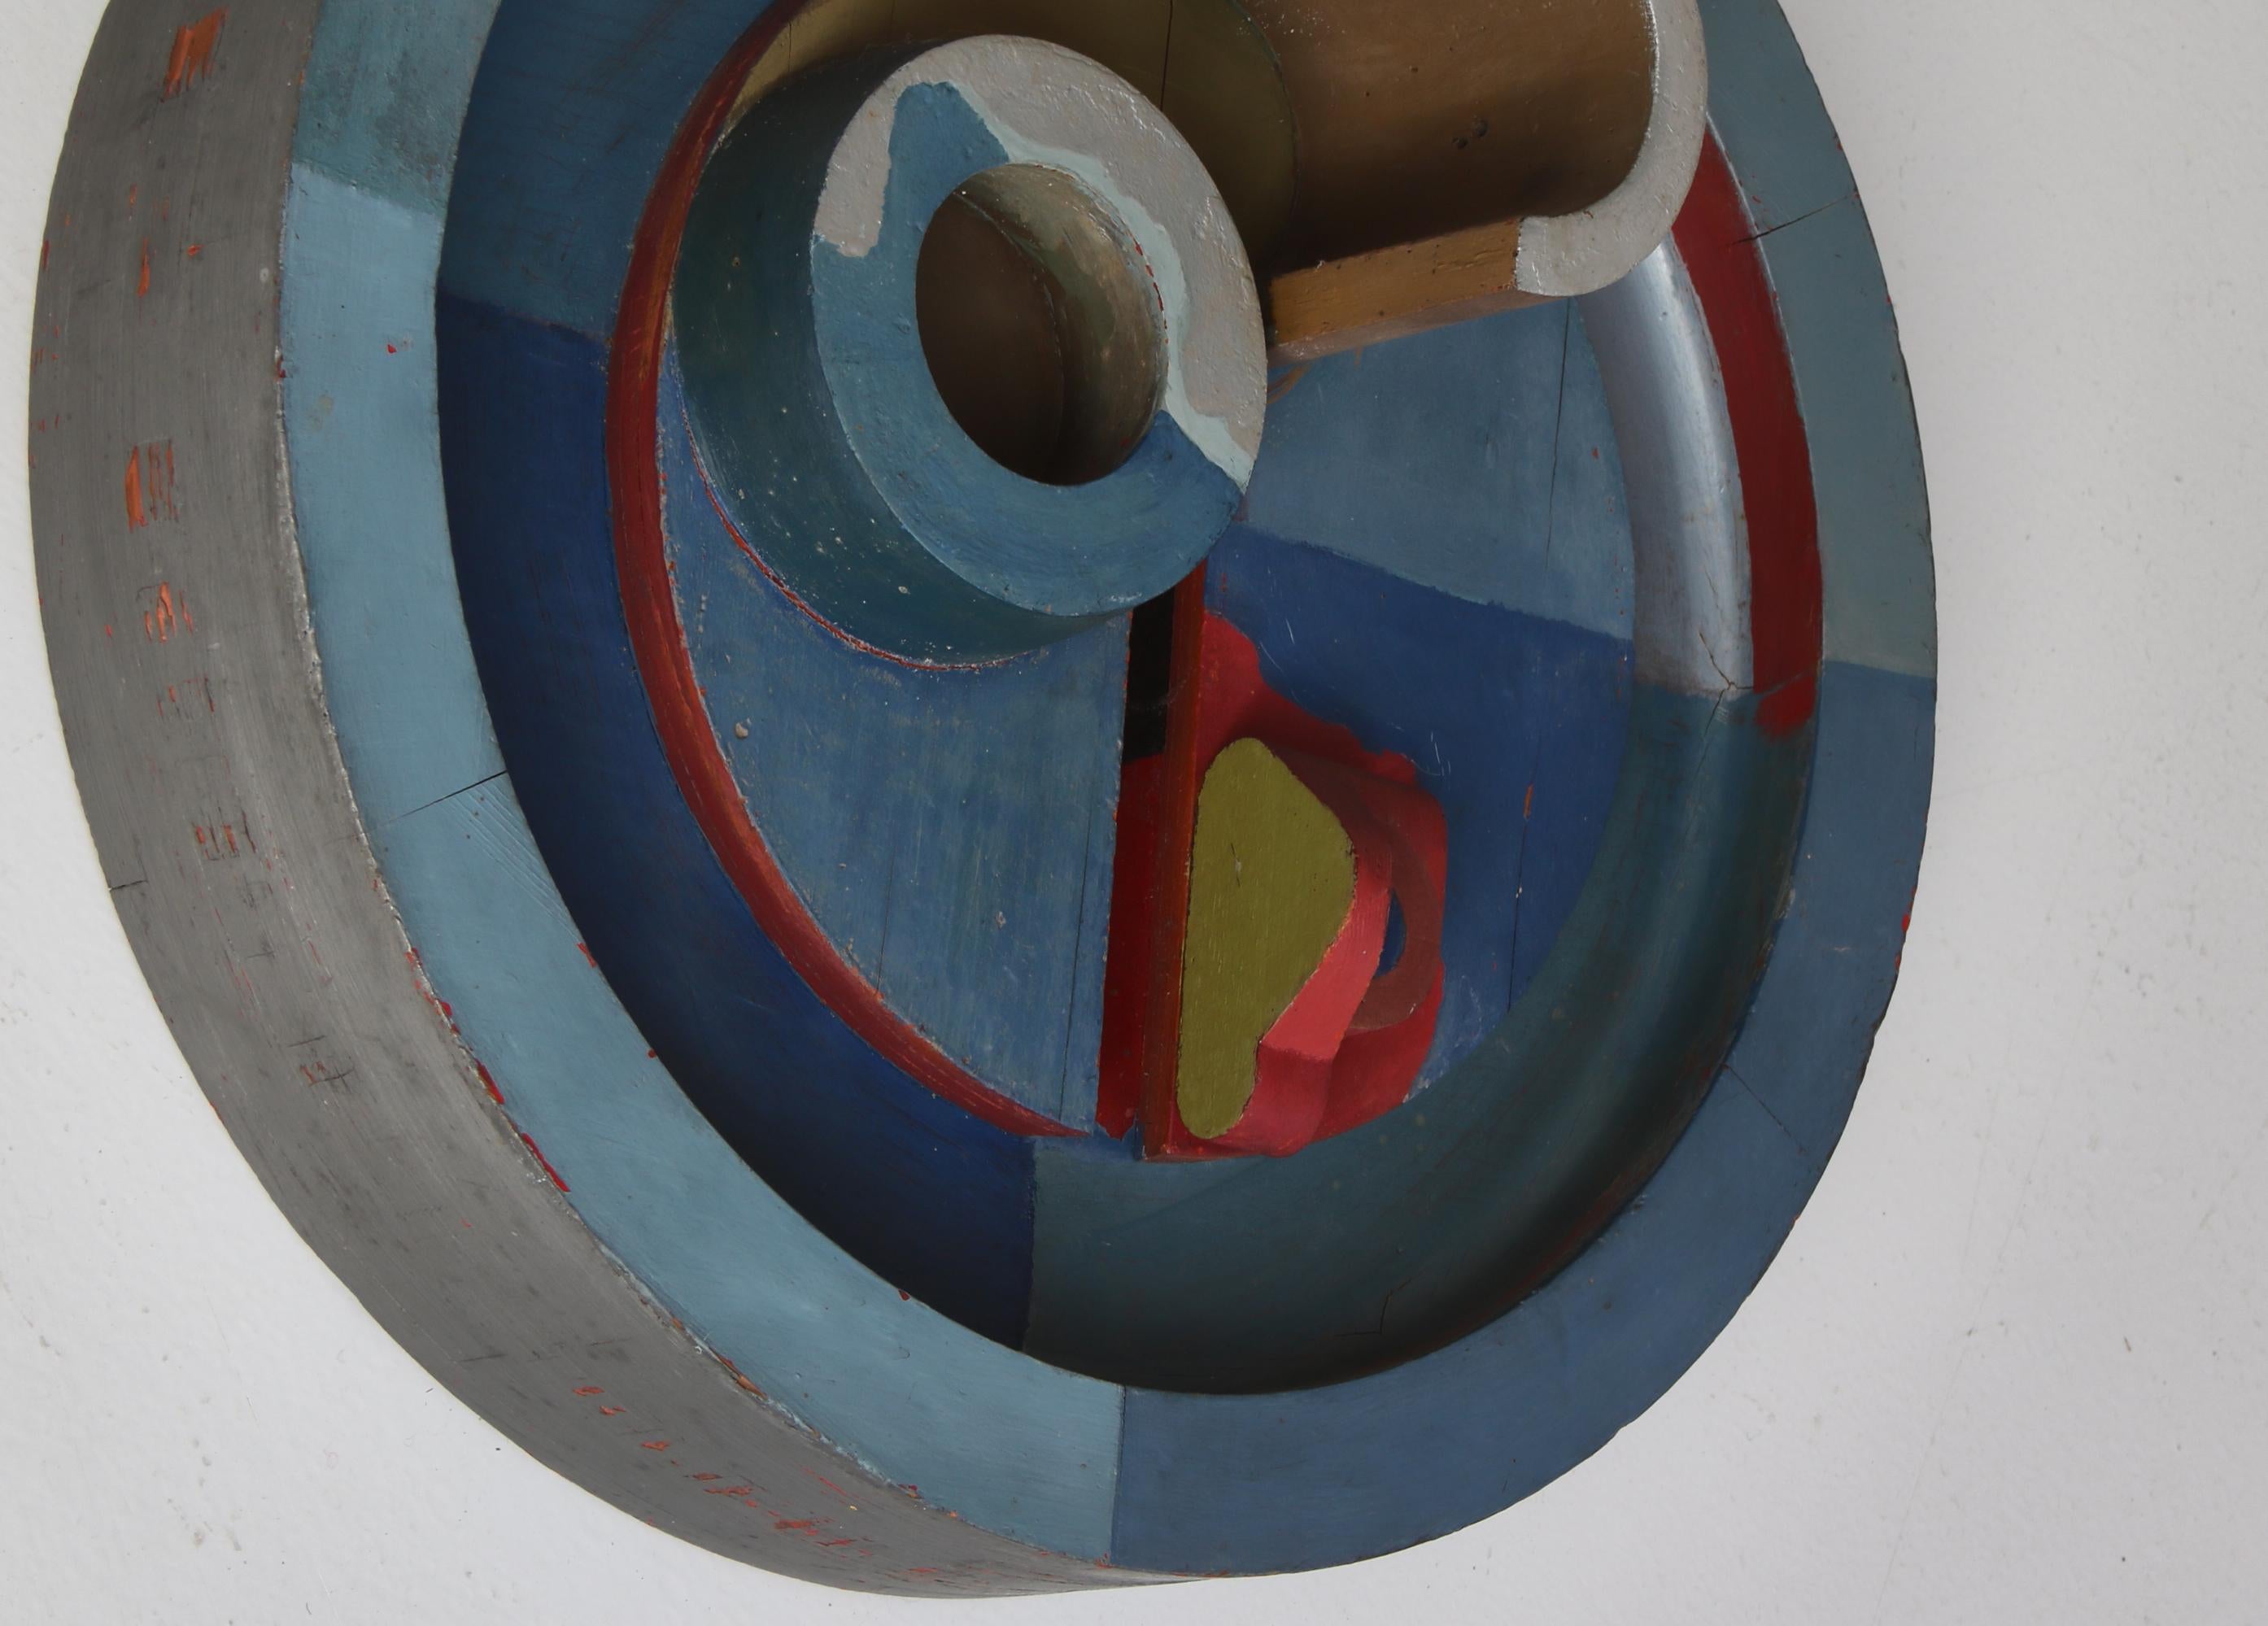 Playful abstract artwork by Danish artist Erik Lagoni Jakobsen made at his own workshop in 1968. The work consist of different found object mounted on a circle and painted. It is inspired by surrealism and dadaism and is typical for Jakobsens works